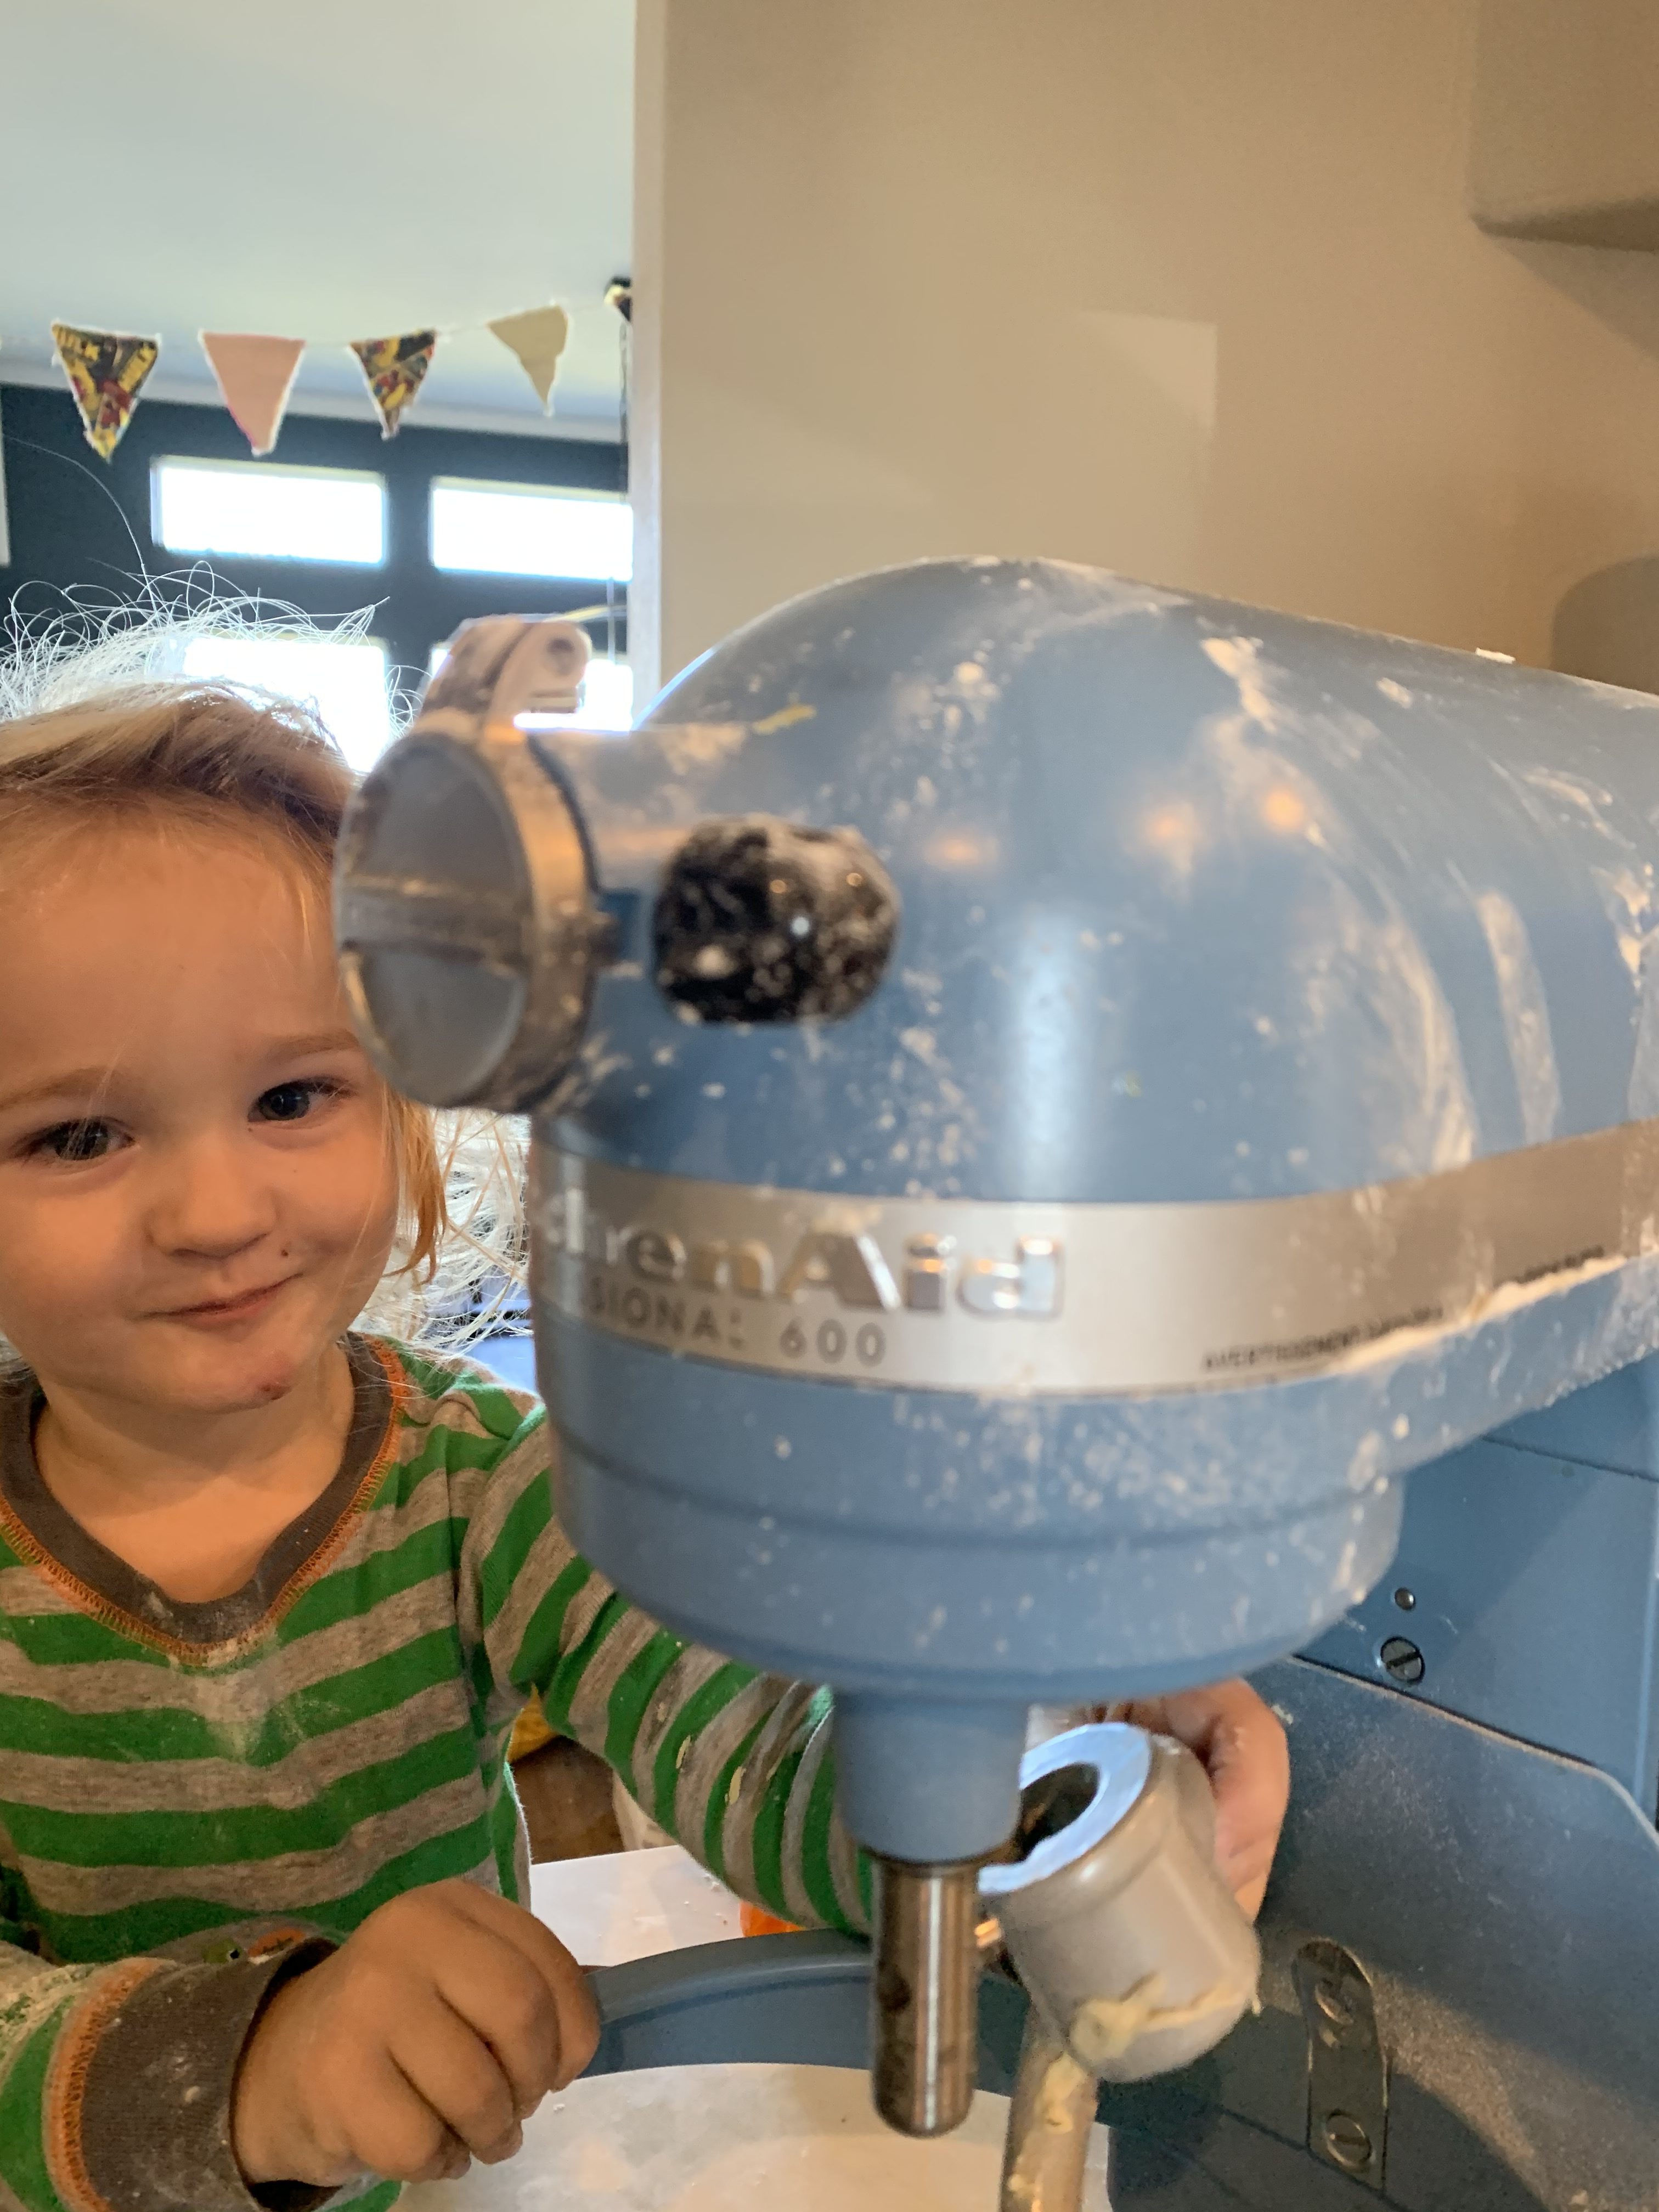 Smirking little boy trying to put attachment on the the baby blue kitchen aid mixer